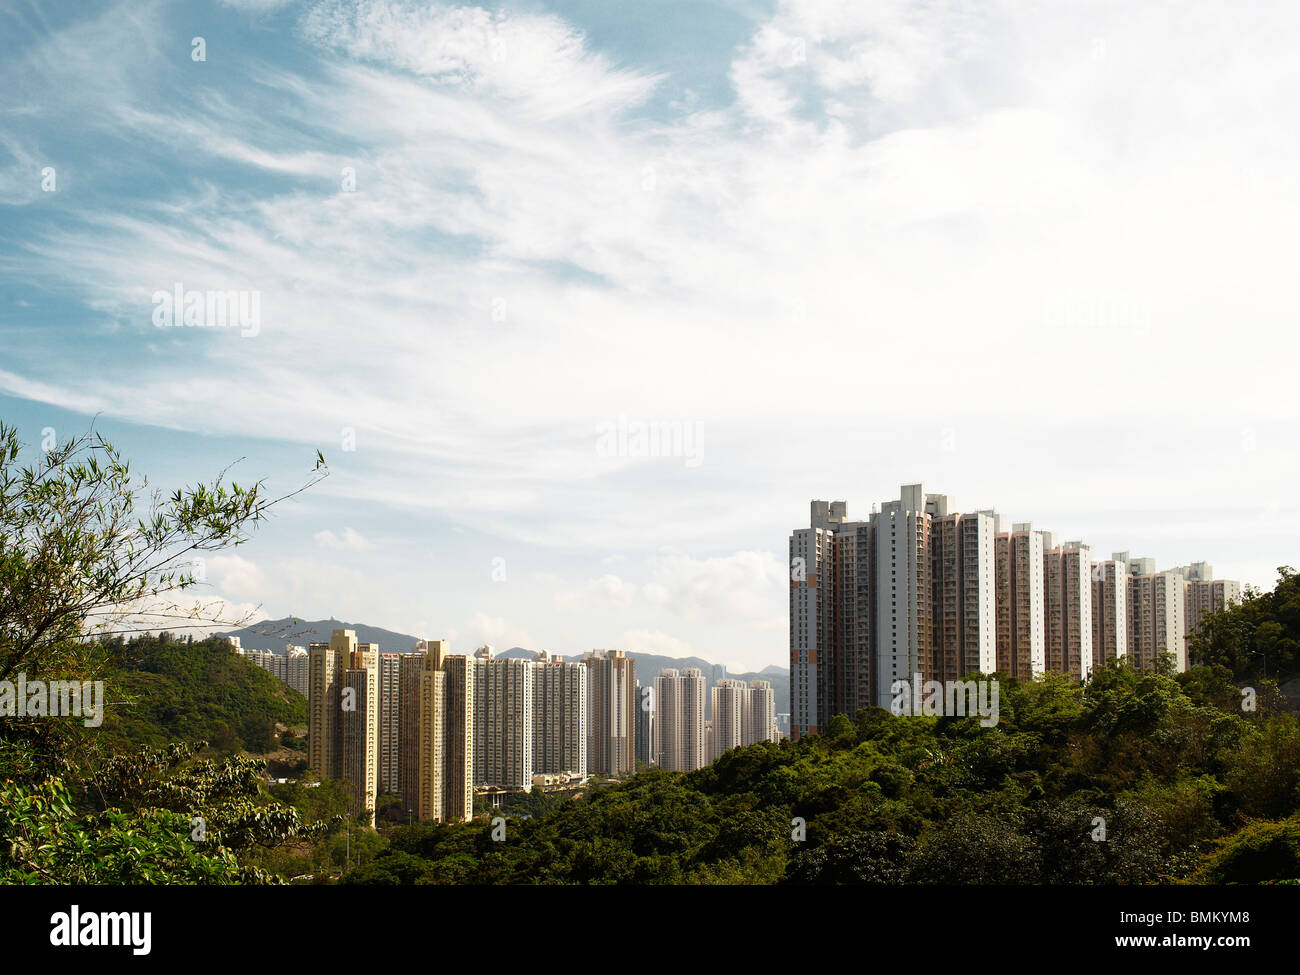 Towers of residential apartment building blocks stand tall on the mountain back, accommodating the growing population. Stock Photo